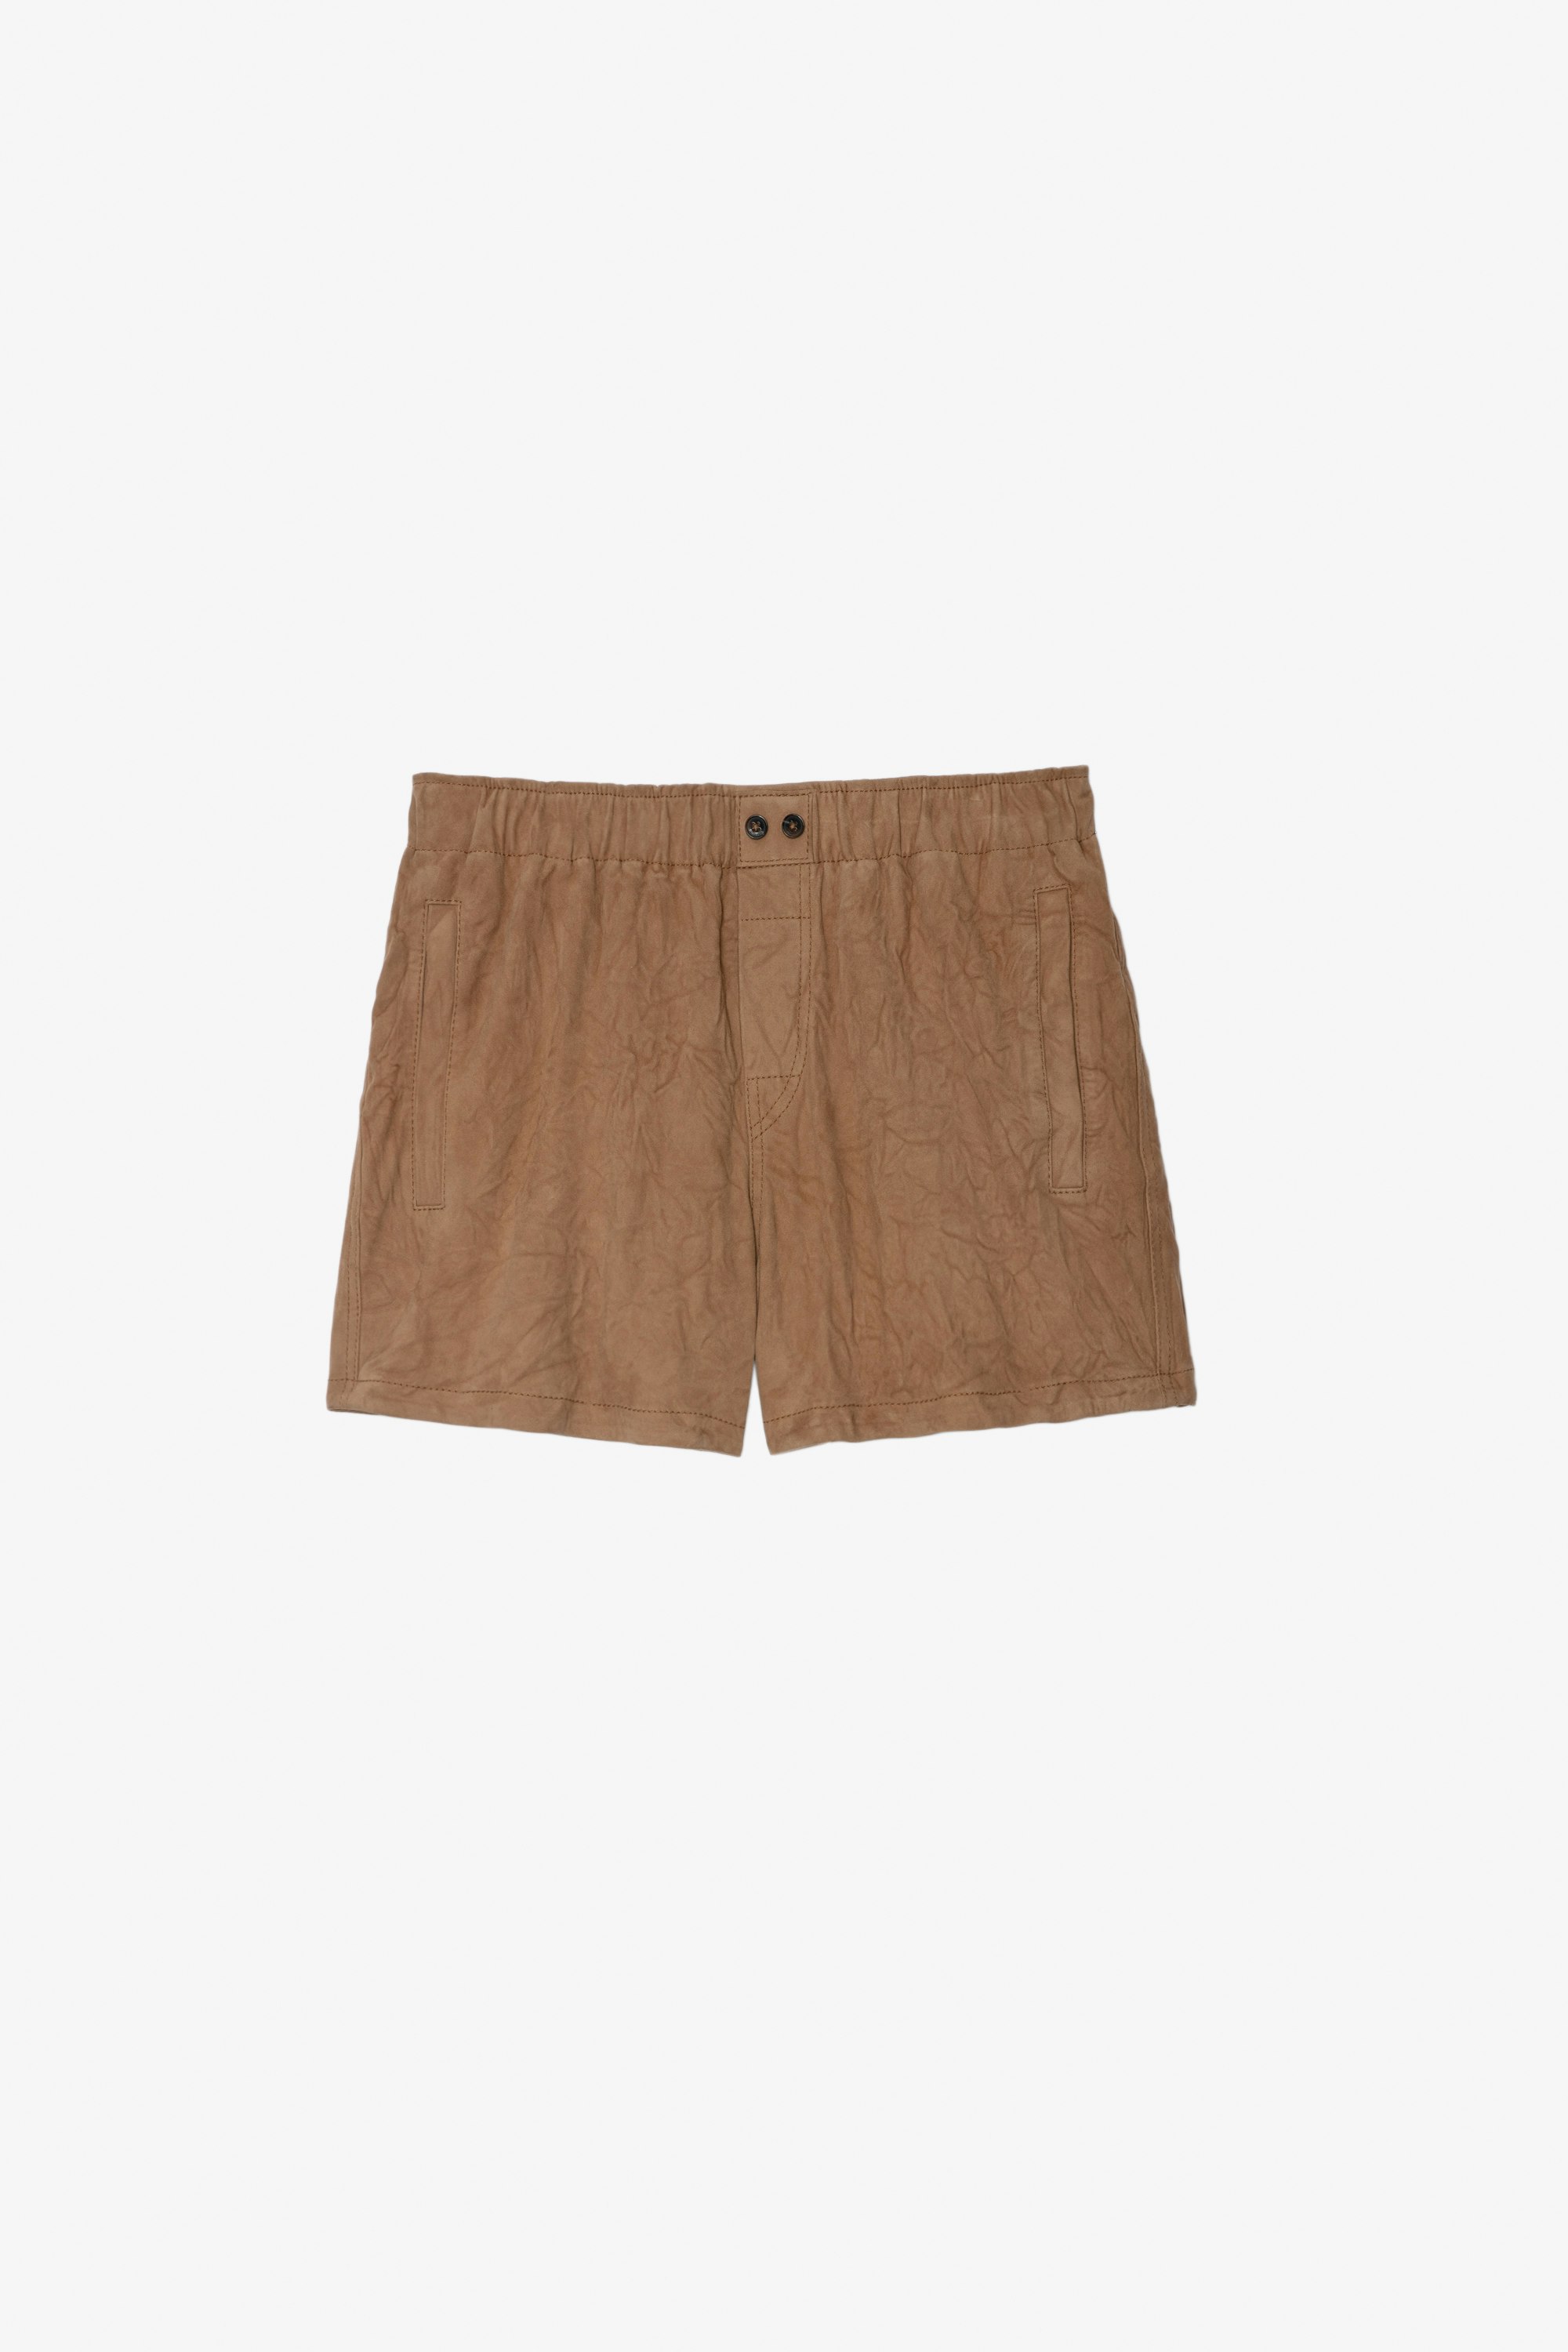 Paxi Creased Suede Shorts Women's crinkled cognac suede shorts